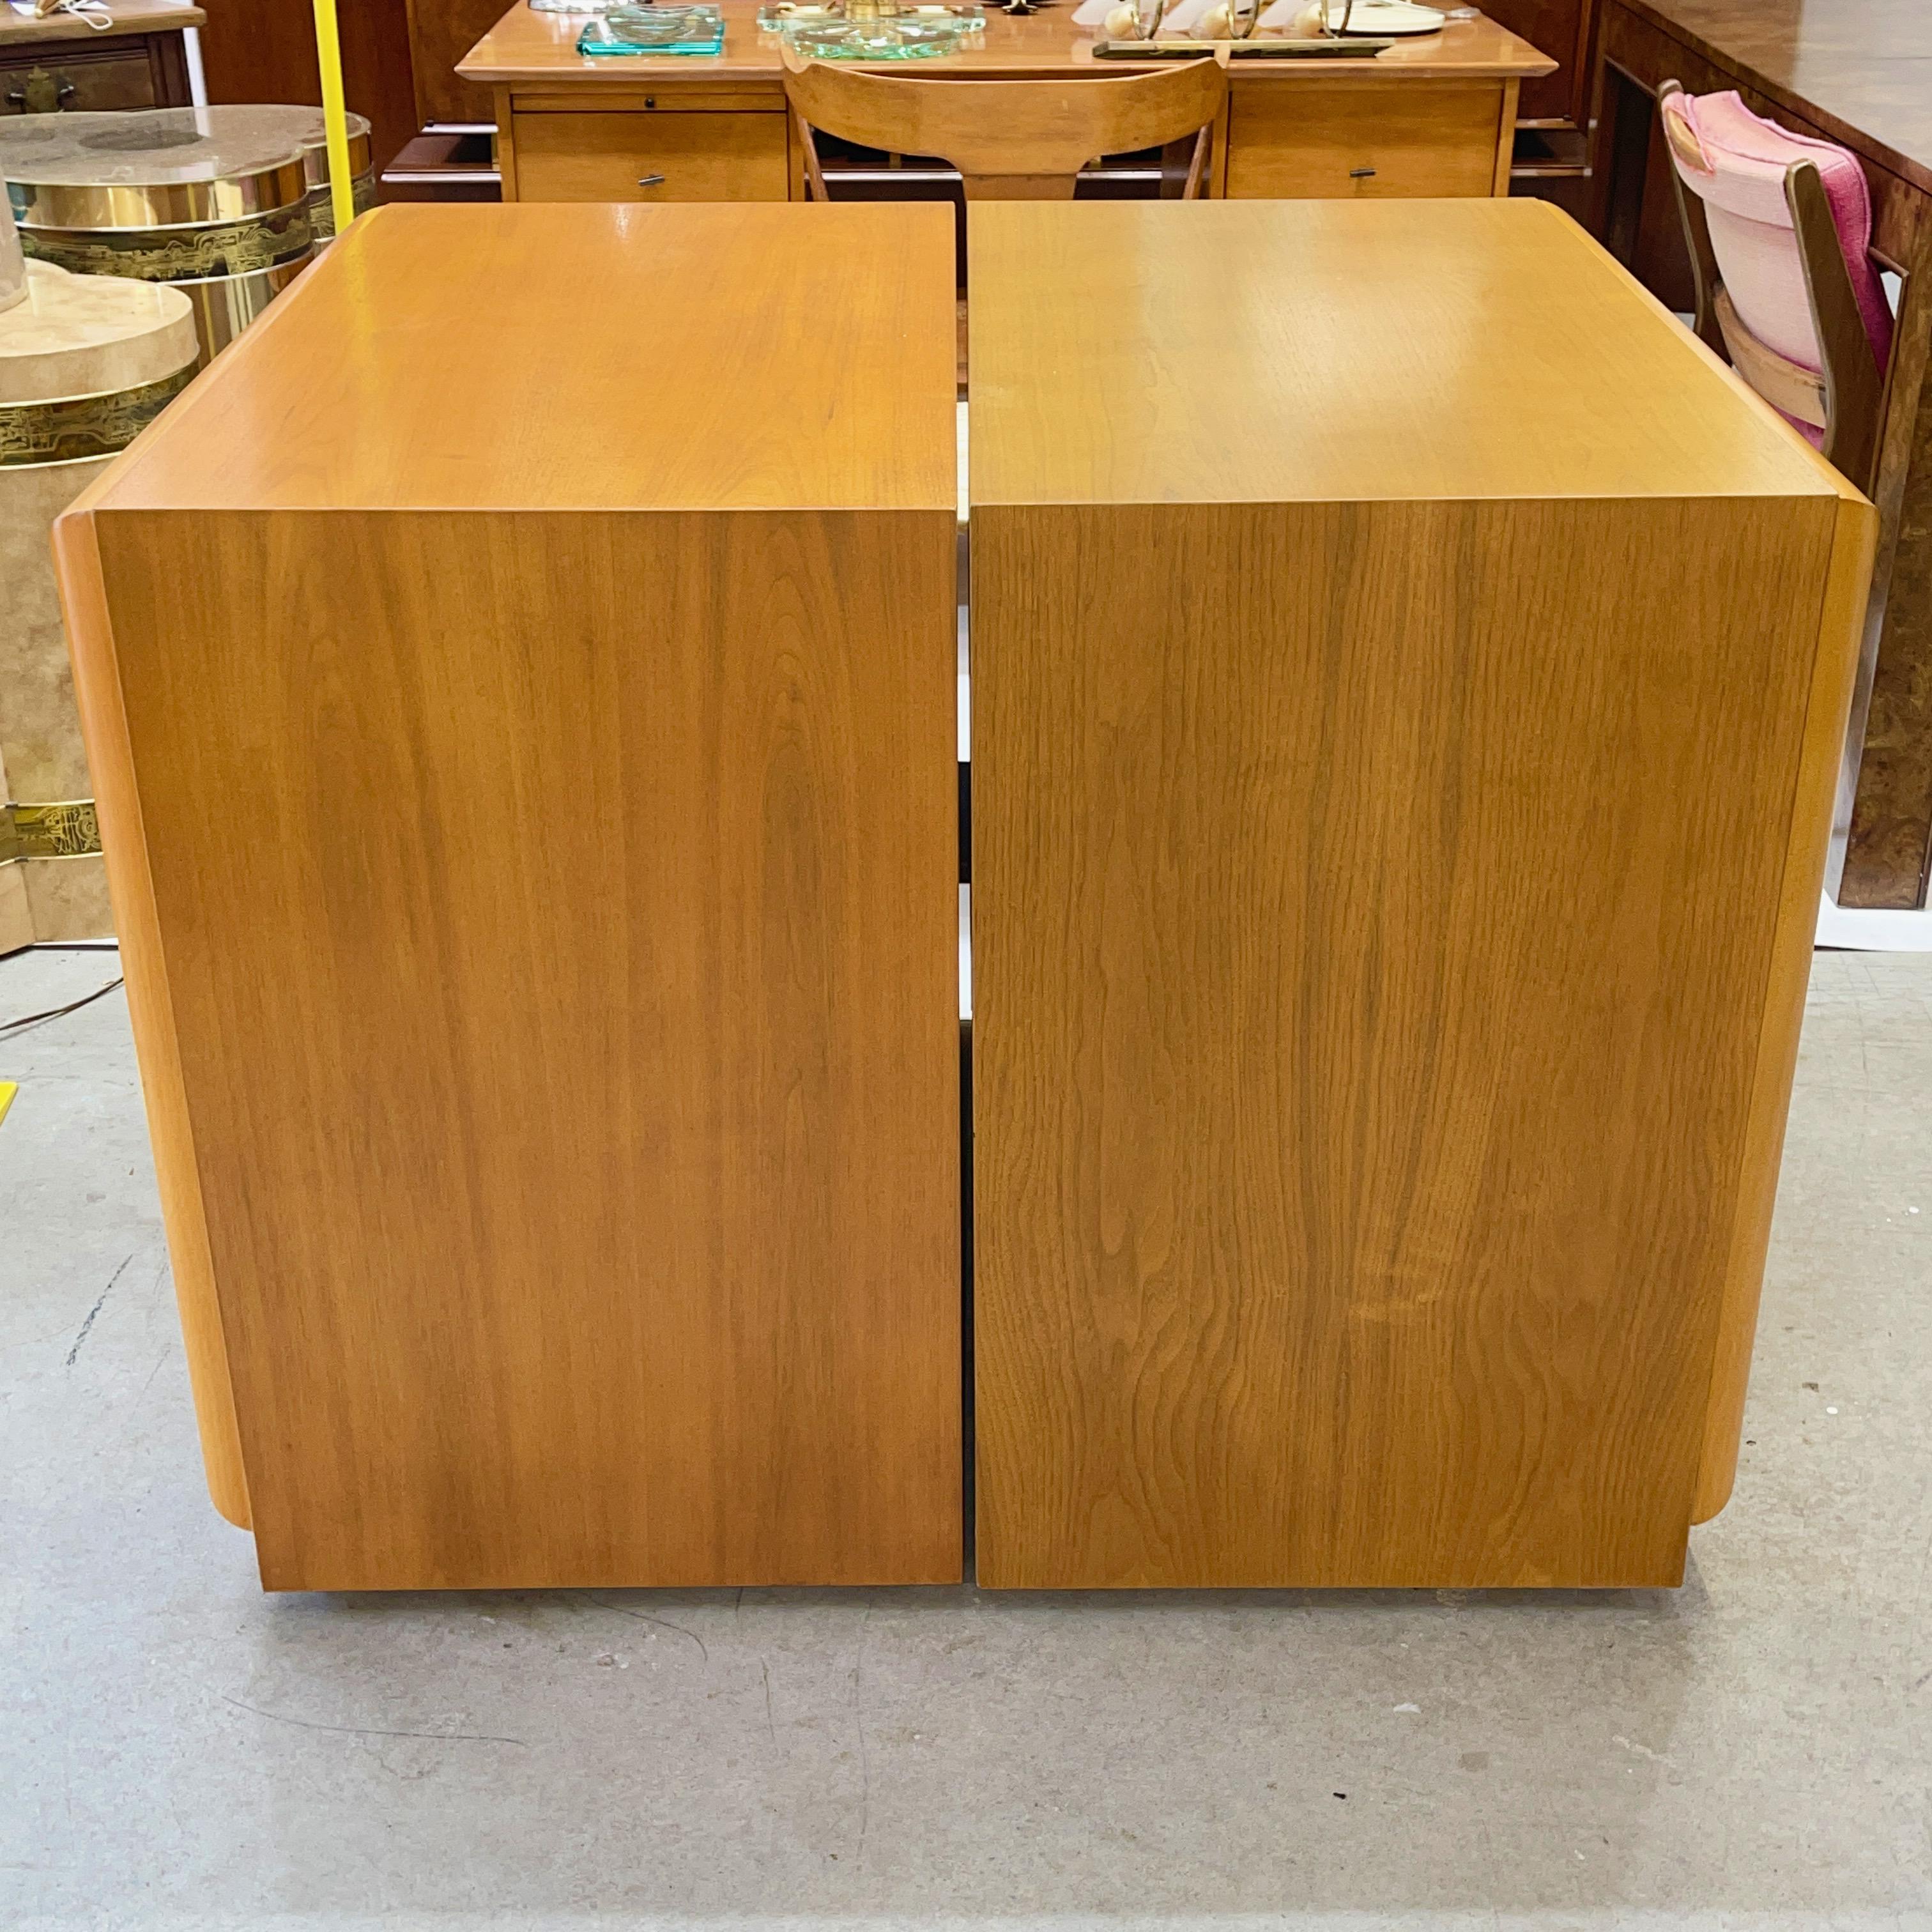 Pair of Robsjohn-Gibbings for Widdicomb 3 Drawer Chests In Good Condition For Sale In Hanover, MA